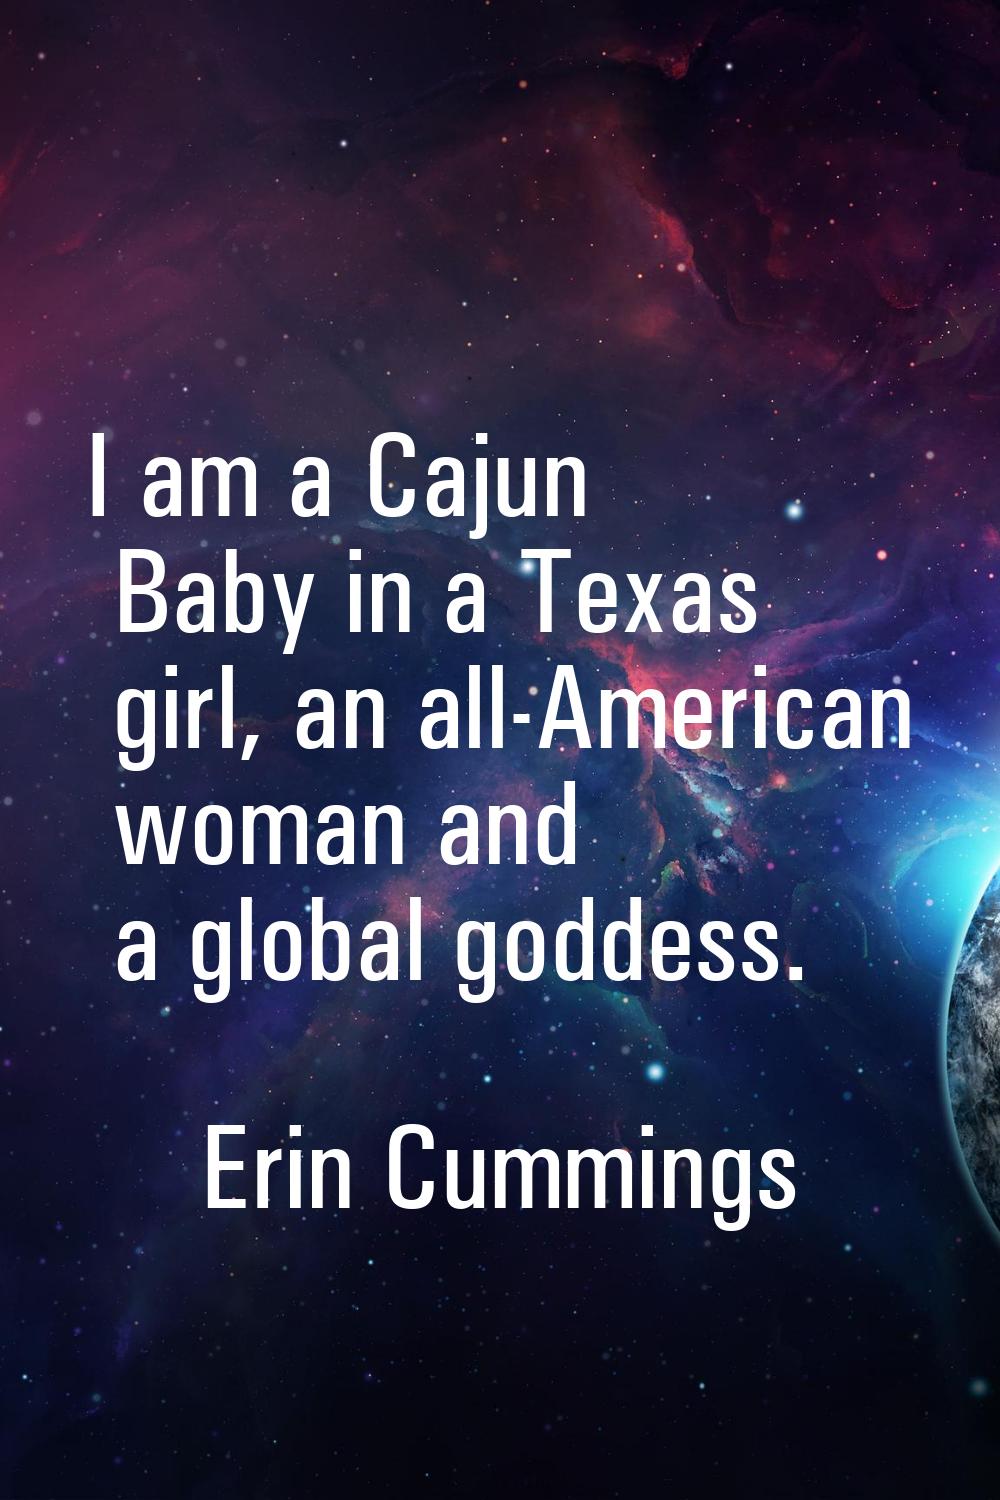 I am a Cajun Baby in a Texas girl, an all-American woman and a global goddess.